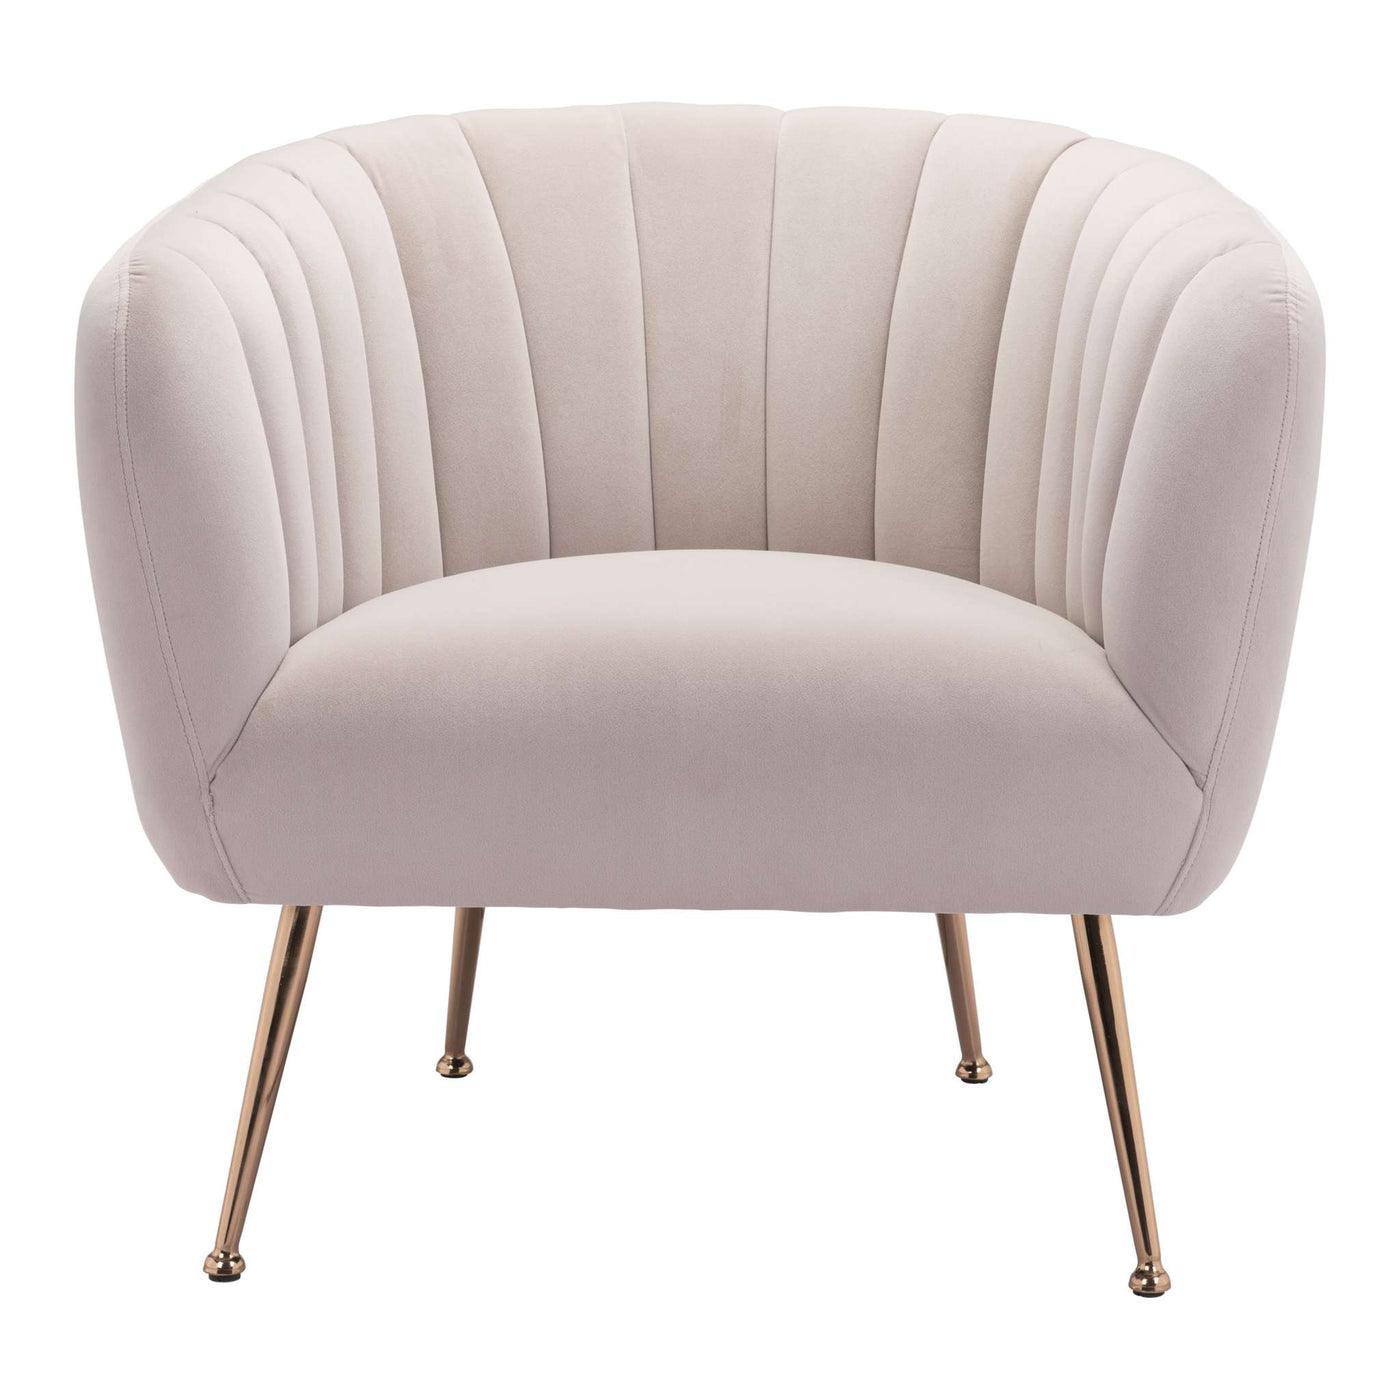 Zuo Mod Deco Accent Chair